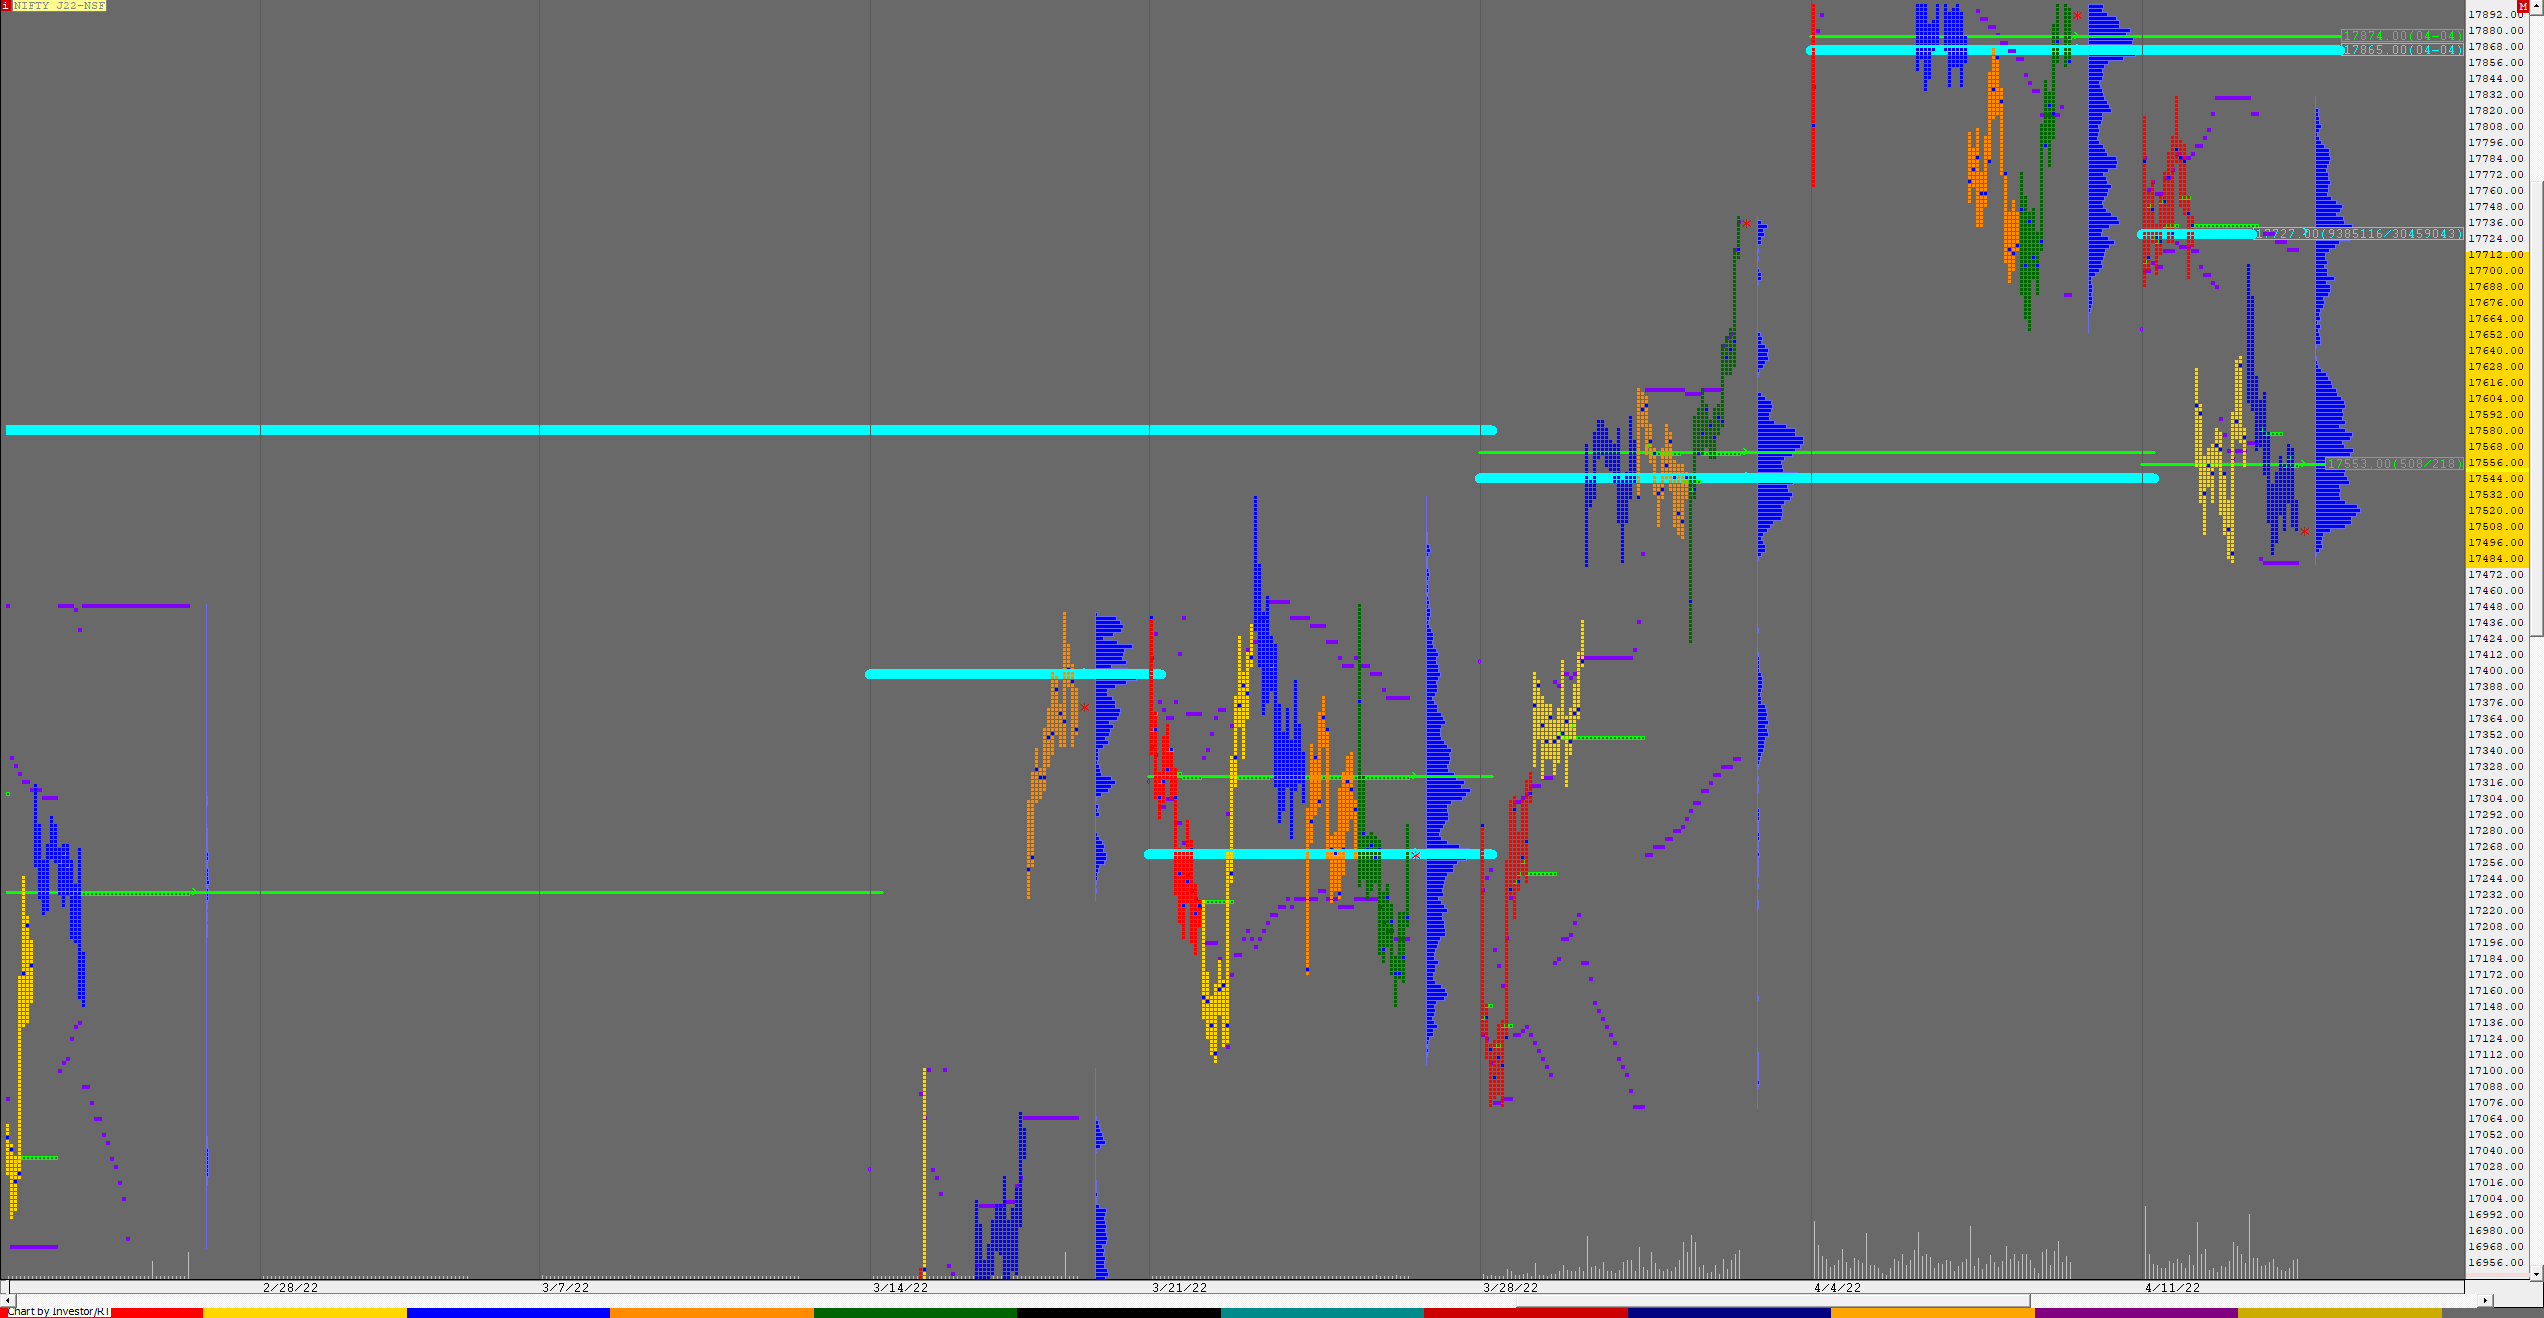 Nf F 2 Weekly Charts (11Th To 13Th Apr 2022) And Market Profile Analysis Banknifty Futures, Charts, Day Trading, Intraday Trading, Intraday Trading Strategies, Market Profile, Market Profile Trading Strategies, Nifty Futures, Order Flow Analysis, Support And Resistance, Technical Analysis, Trading Strategies, Volume Profile Trading